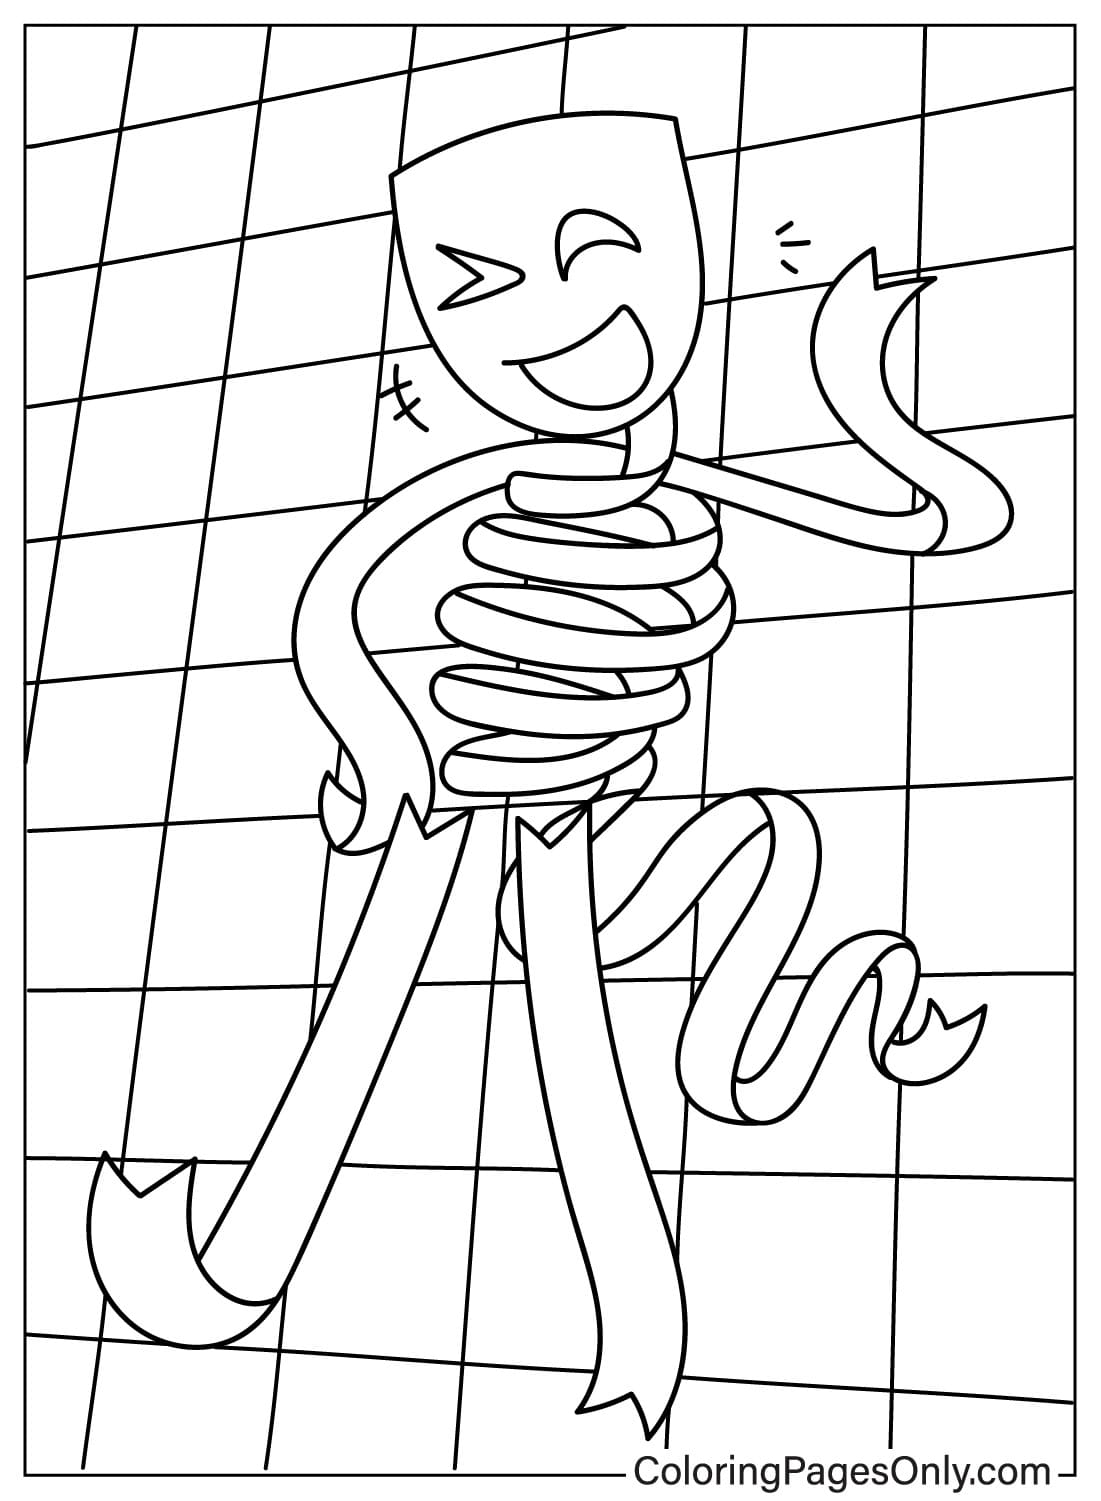 Printable Gangle Coloring Page from Gangle